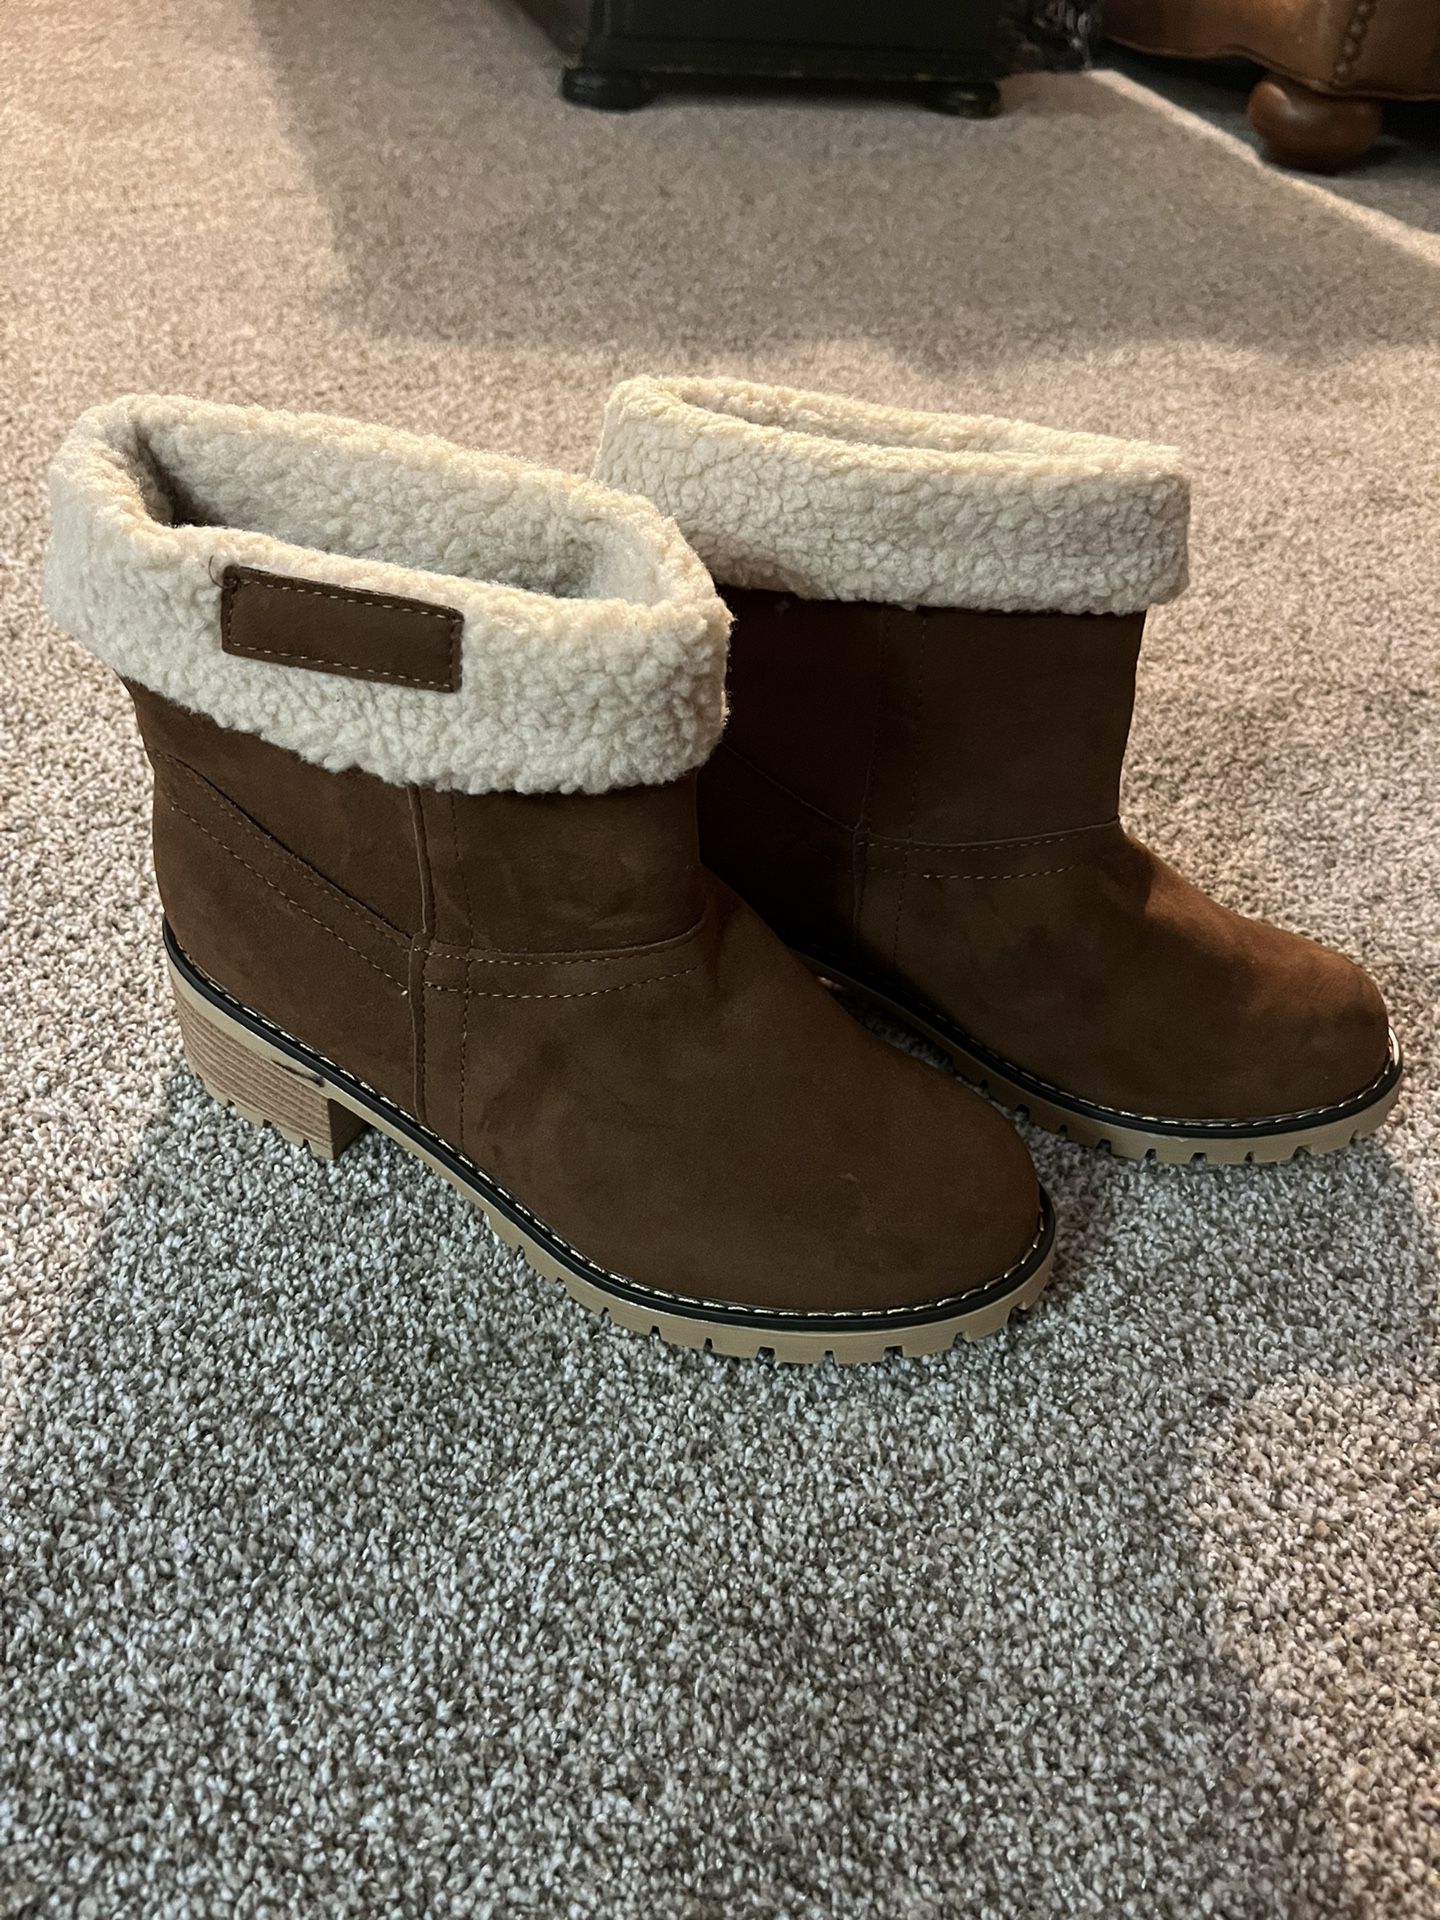 Brown boots size 10. Cuff them or pull up. Brand new never worn women’s boots.